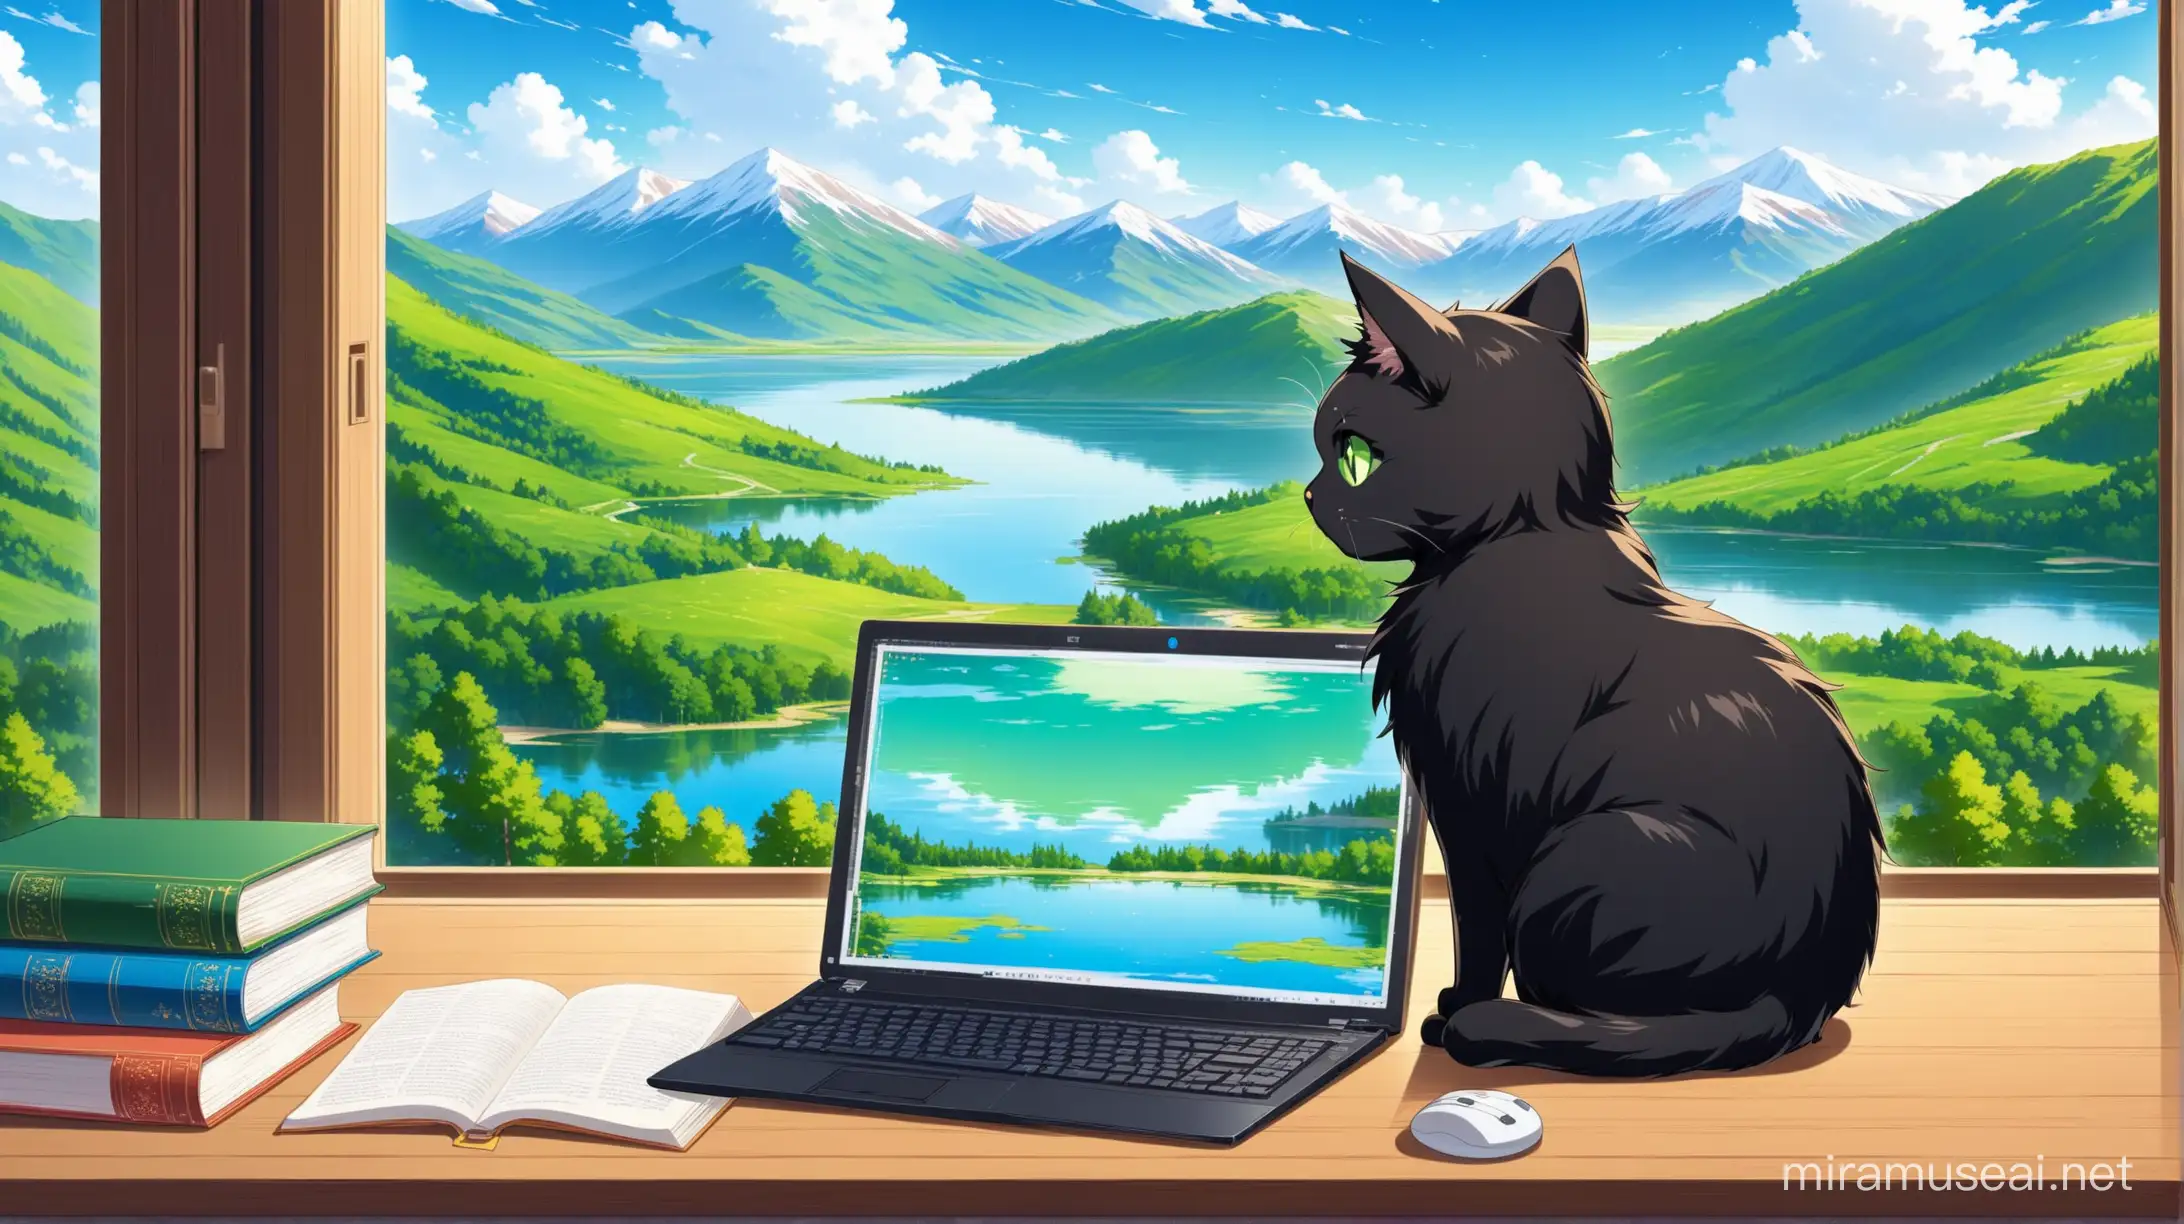 The black-furred, green-eyed cat studies with a computer and books on the table. In the environment where the cat is located, there are lakes, mountains, hills, sky views and trees.